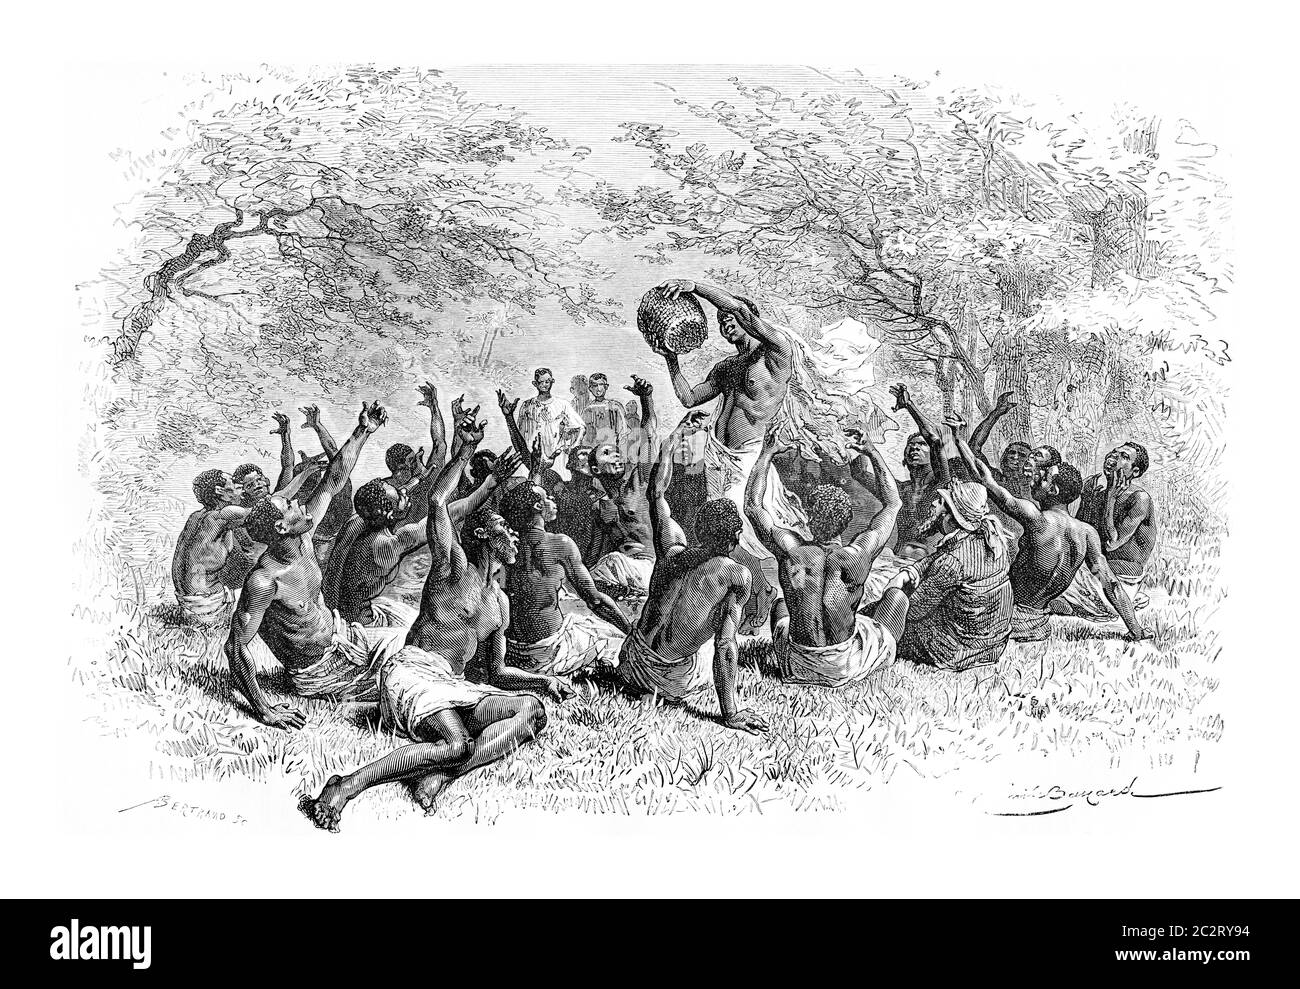 The Major and the Soothsayer, in Angola, Southern Africa, drawing by Bayard based on a sketch by Serpa Pinto, vintage engraved illustration. Le Tour d Stock Photo